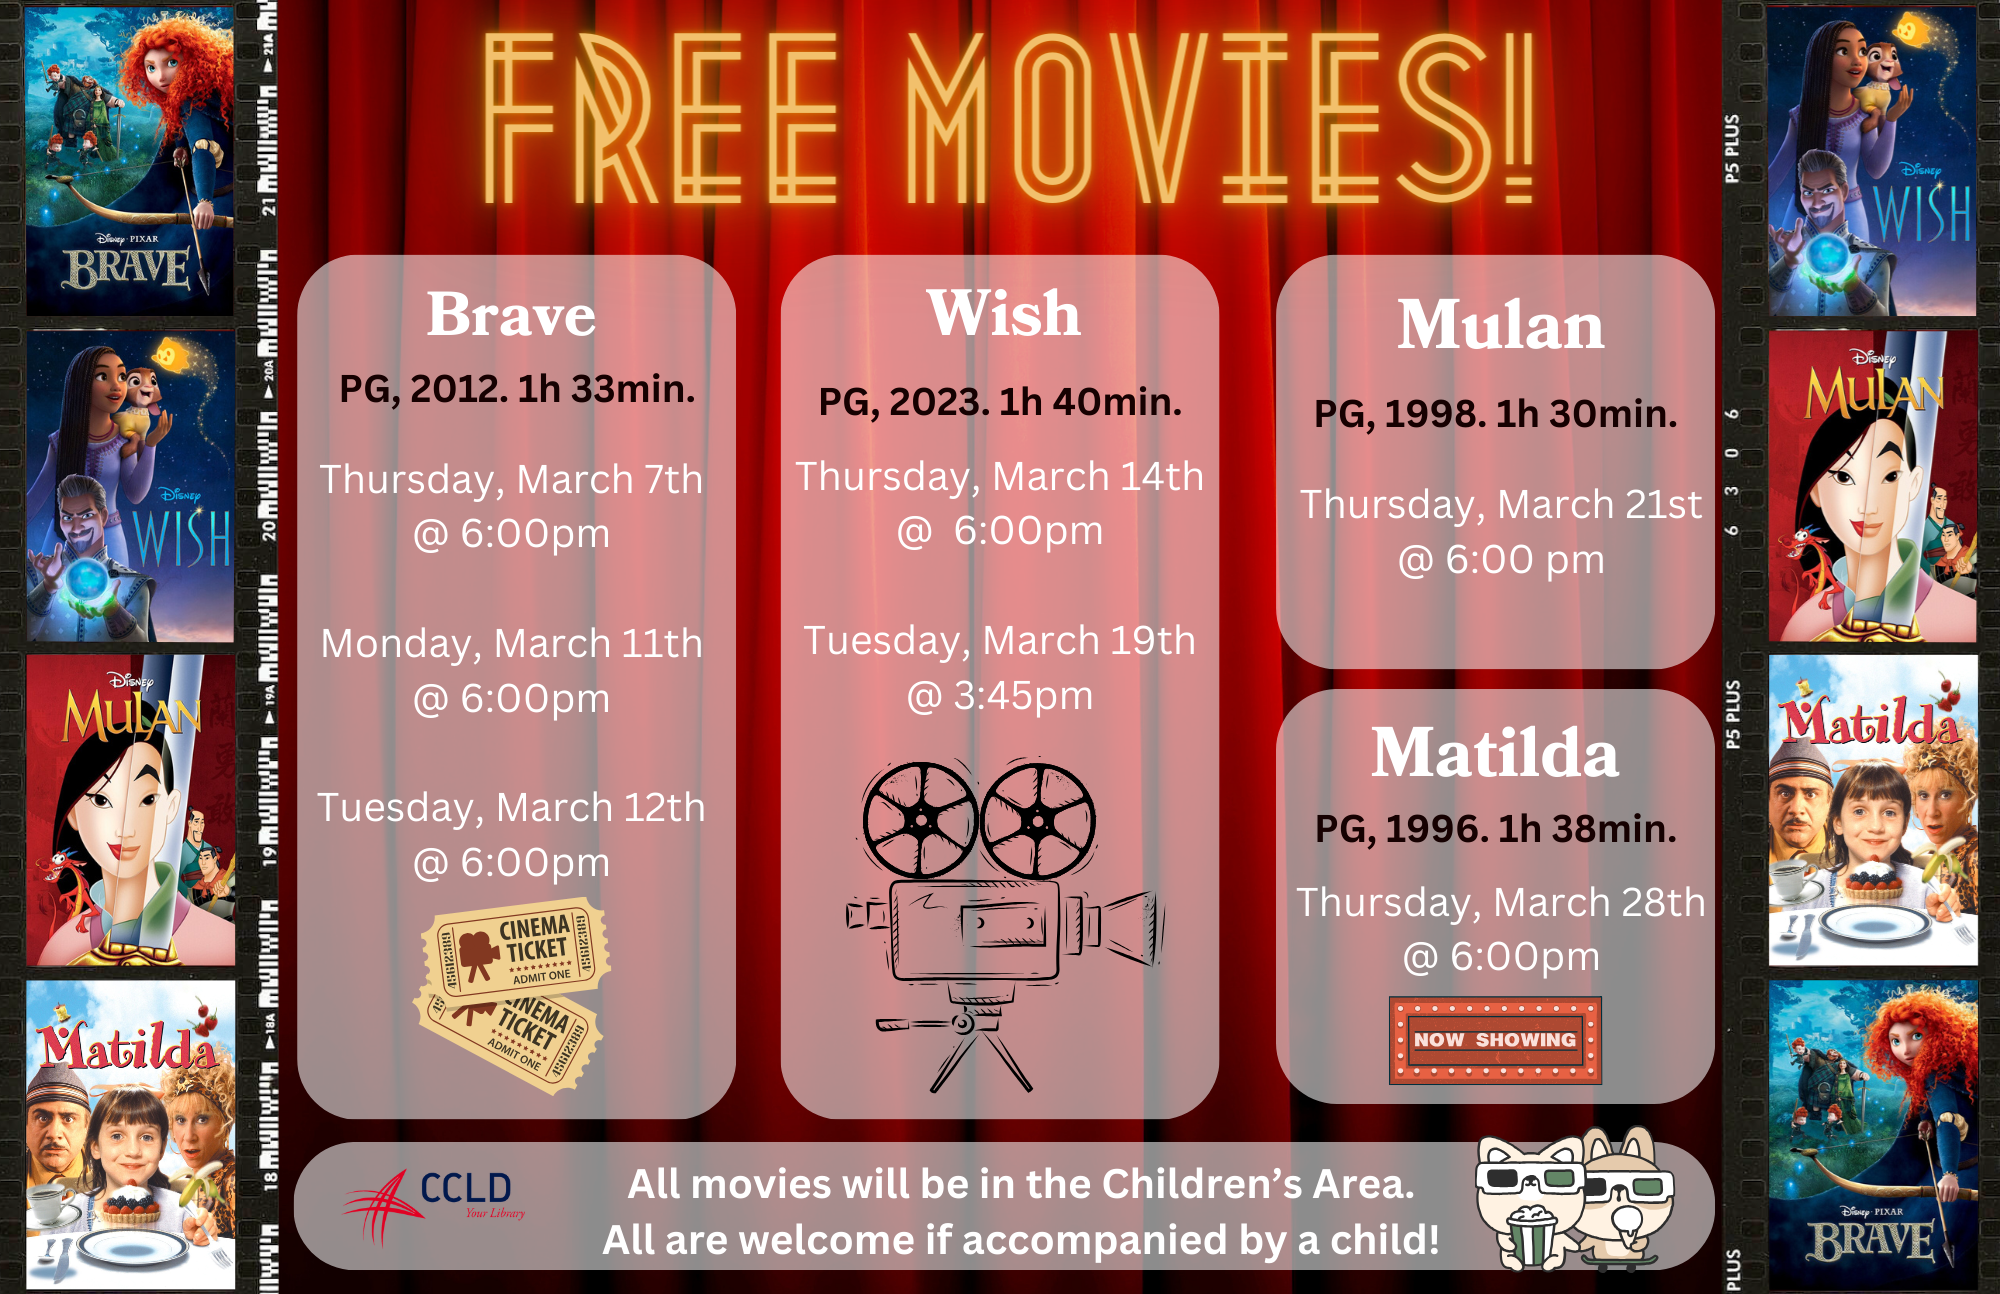 Join us to watch Disney's "Wish"! 
Rated PG, 2023.
Snacks and water provided. All are welcome if accompanied by a child!